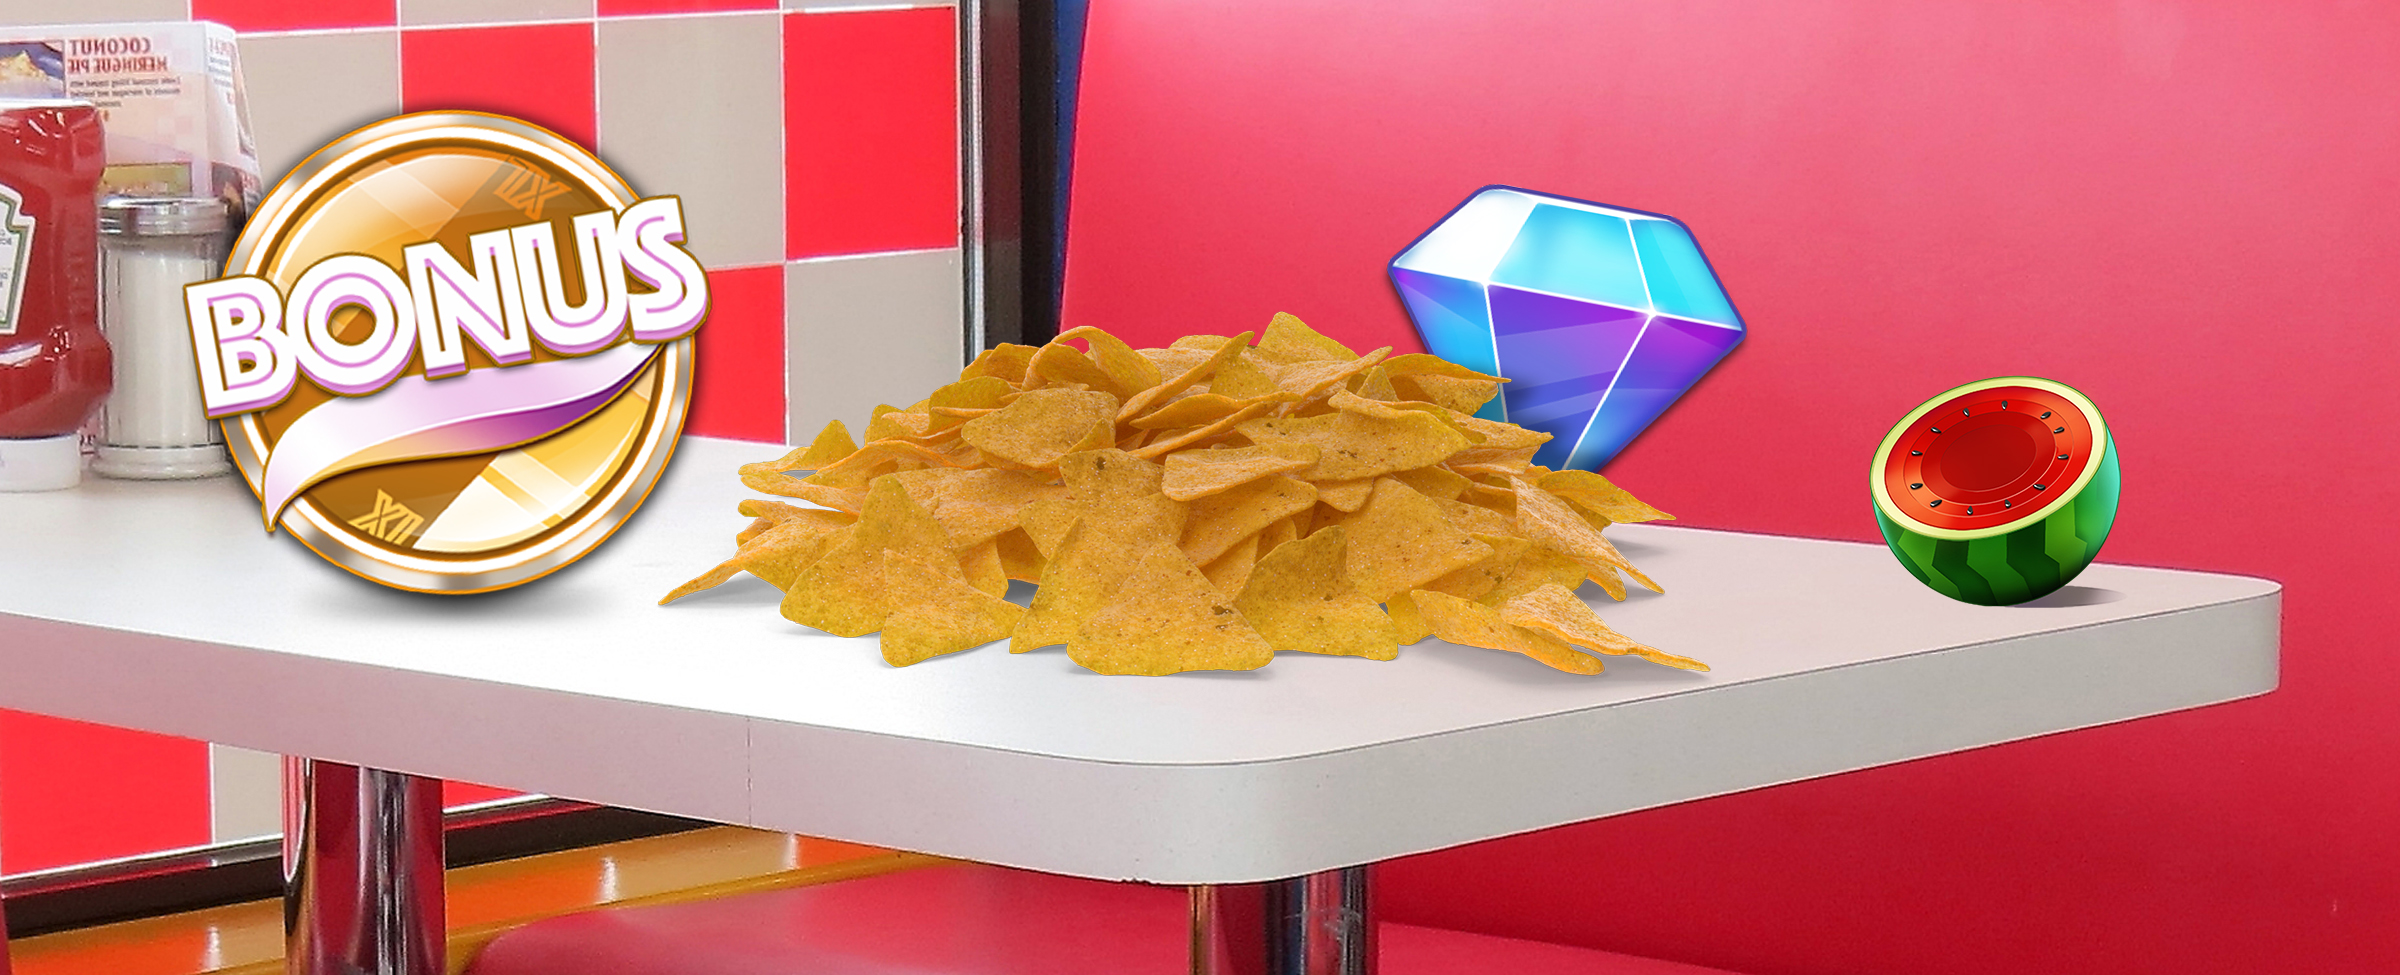 A large pile of corn chips sits atop a white cafe table, with an oversized animated diamond sticking out. To the right is a small watermelon symbol, and to the left is a 3D-animated bonus symbol from a Cafe Casino slot game.